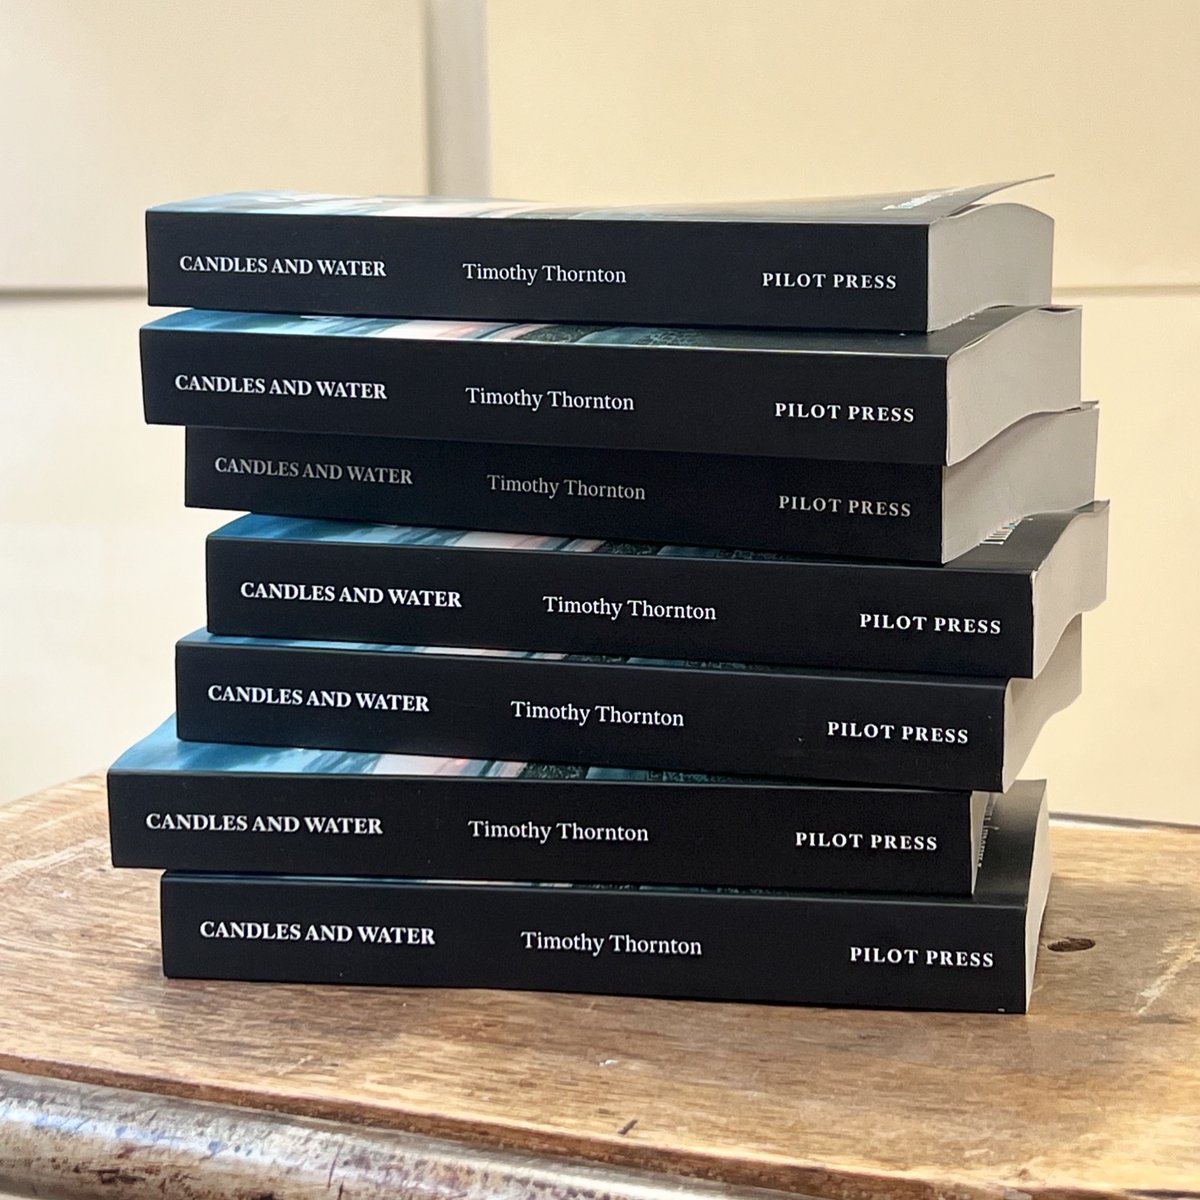 The press’s biggest book yet at over 300 pages! Timothy Thornton’s CANDLES AND WATER arrives in bookshops in May—for fans of Melville, Blake, Spicer, Jarman and queer, haunted prose about the outer edges of human experience. For a review copy, email pilotpresslondon@gmail.com